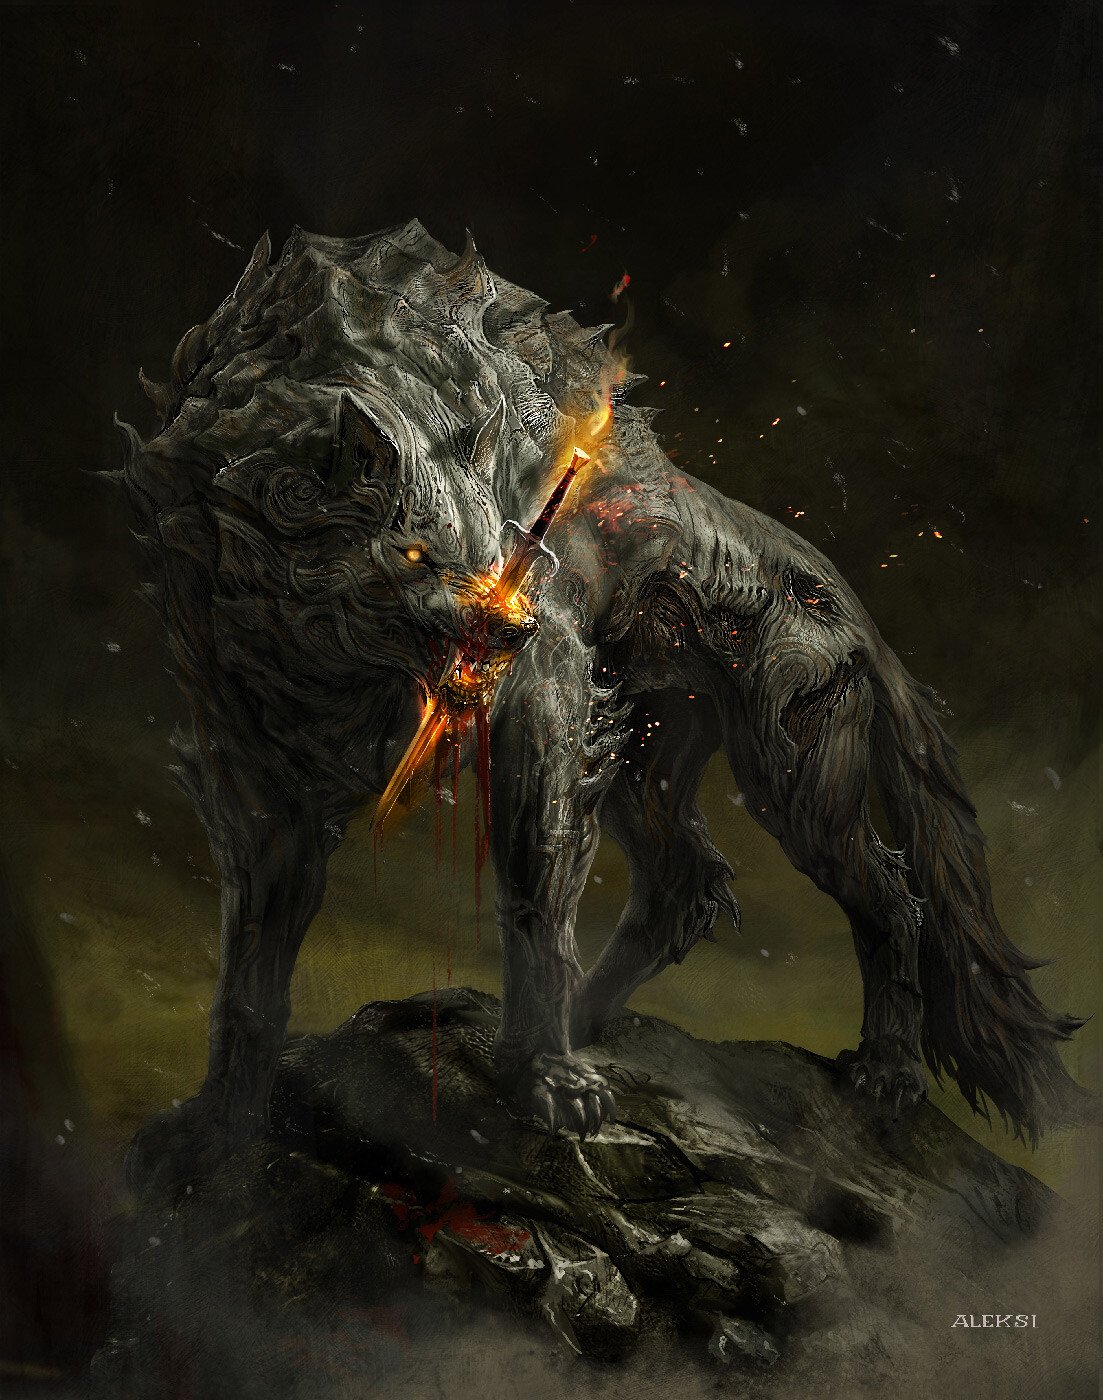 A digital art image of a mythical creature. The creature is a wolf-like beast with a body made of stone and lava. The creature has a mane of stone spikes and its eyes and mouth are glowing with lava. The creature is standing on a pile of rocks with lava flowing through them. The background is dark and cloudy with sparks flying around the creature.